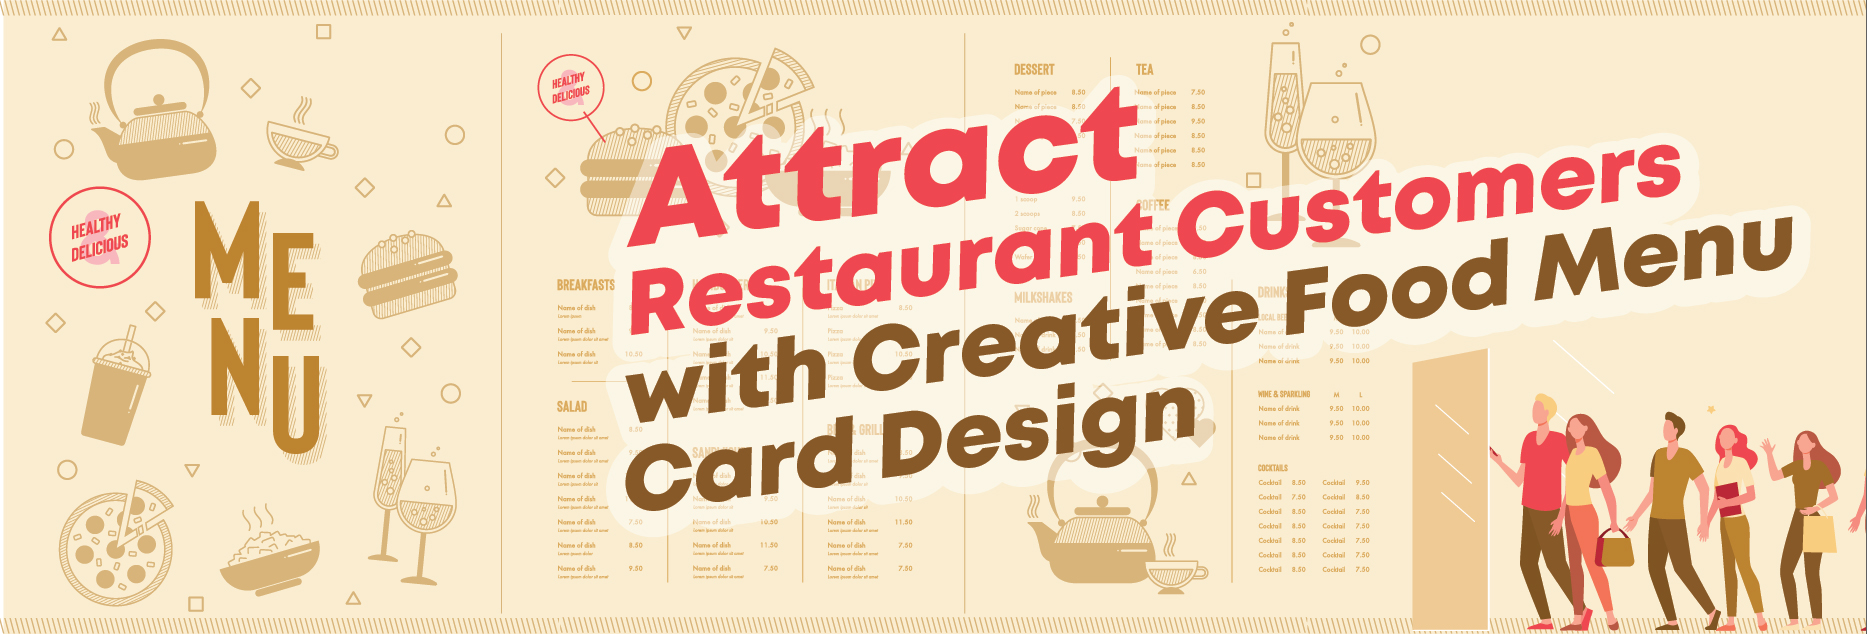 Attract Restaurant Customers with Creative Food Menu Card Design